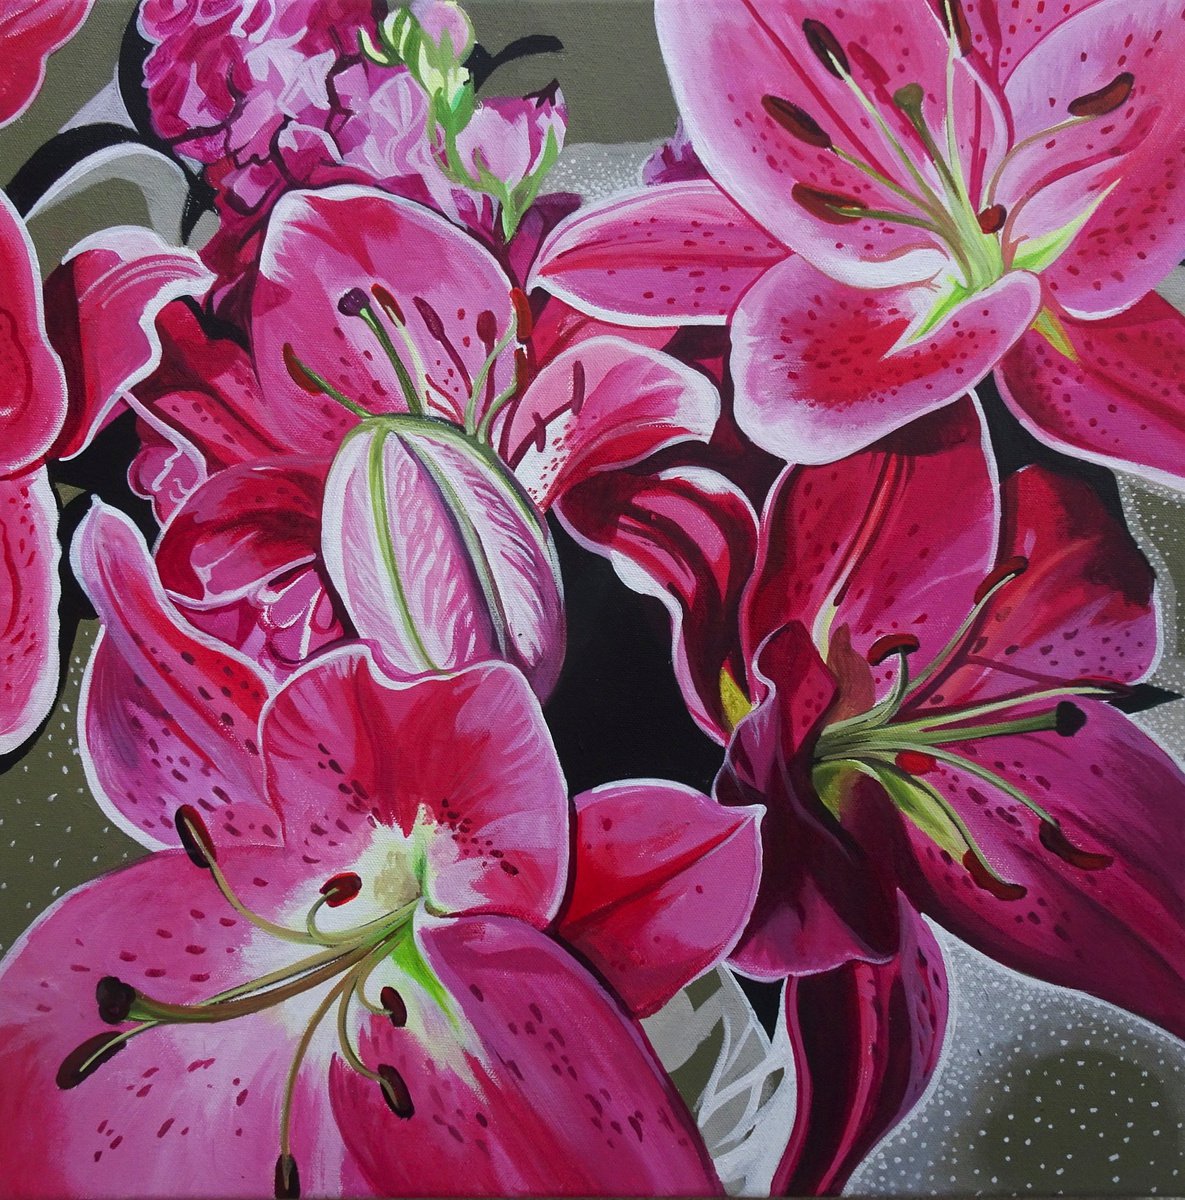 Lillies In Pinks And Reds by Joseph Lynch